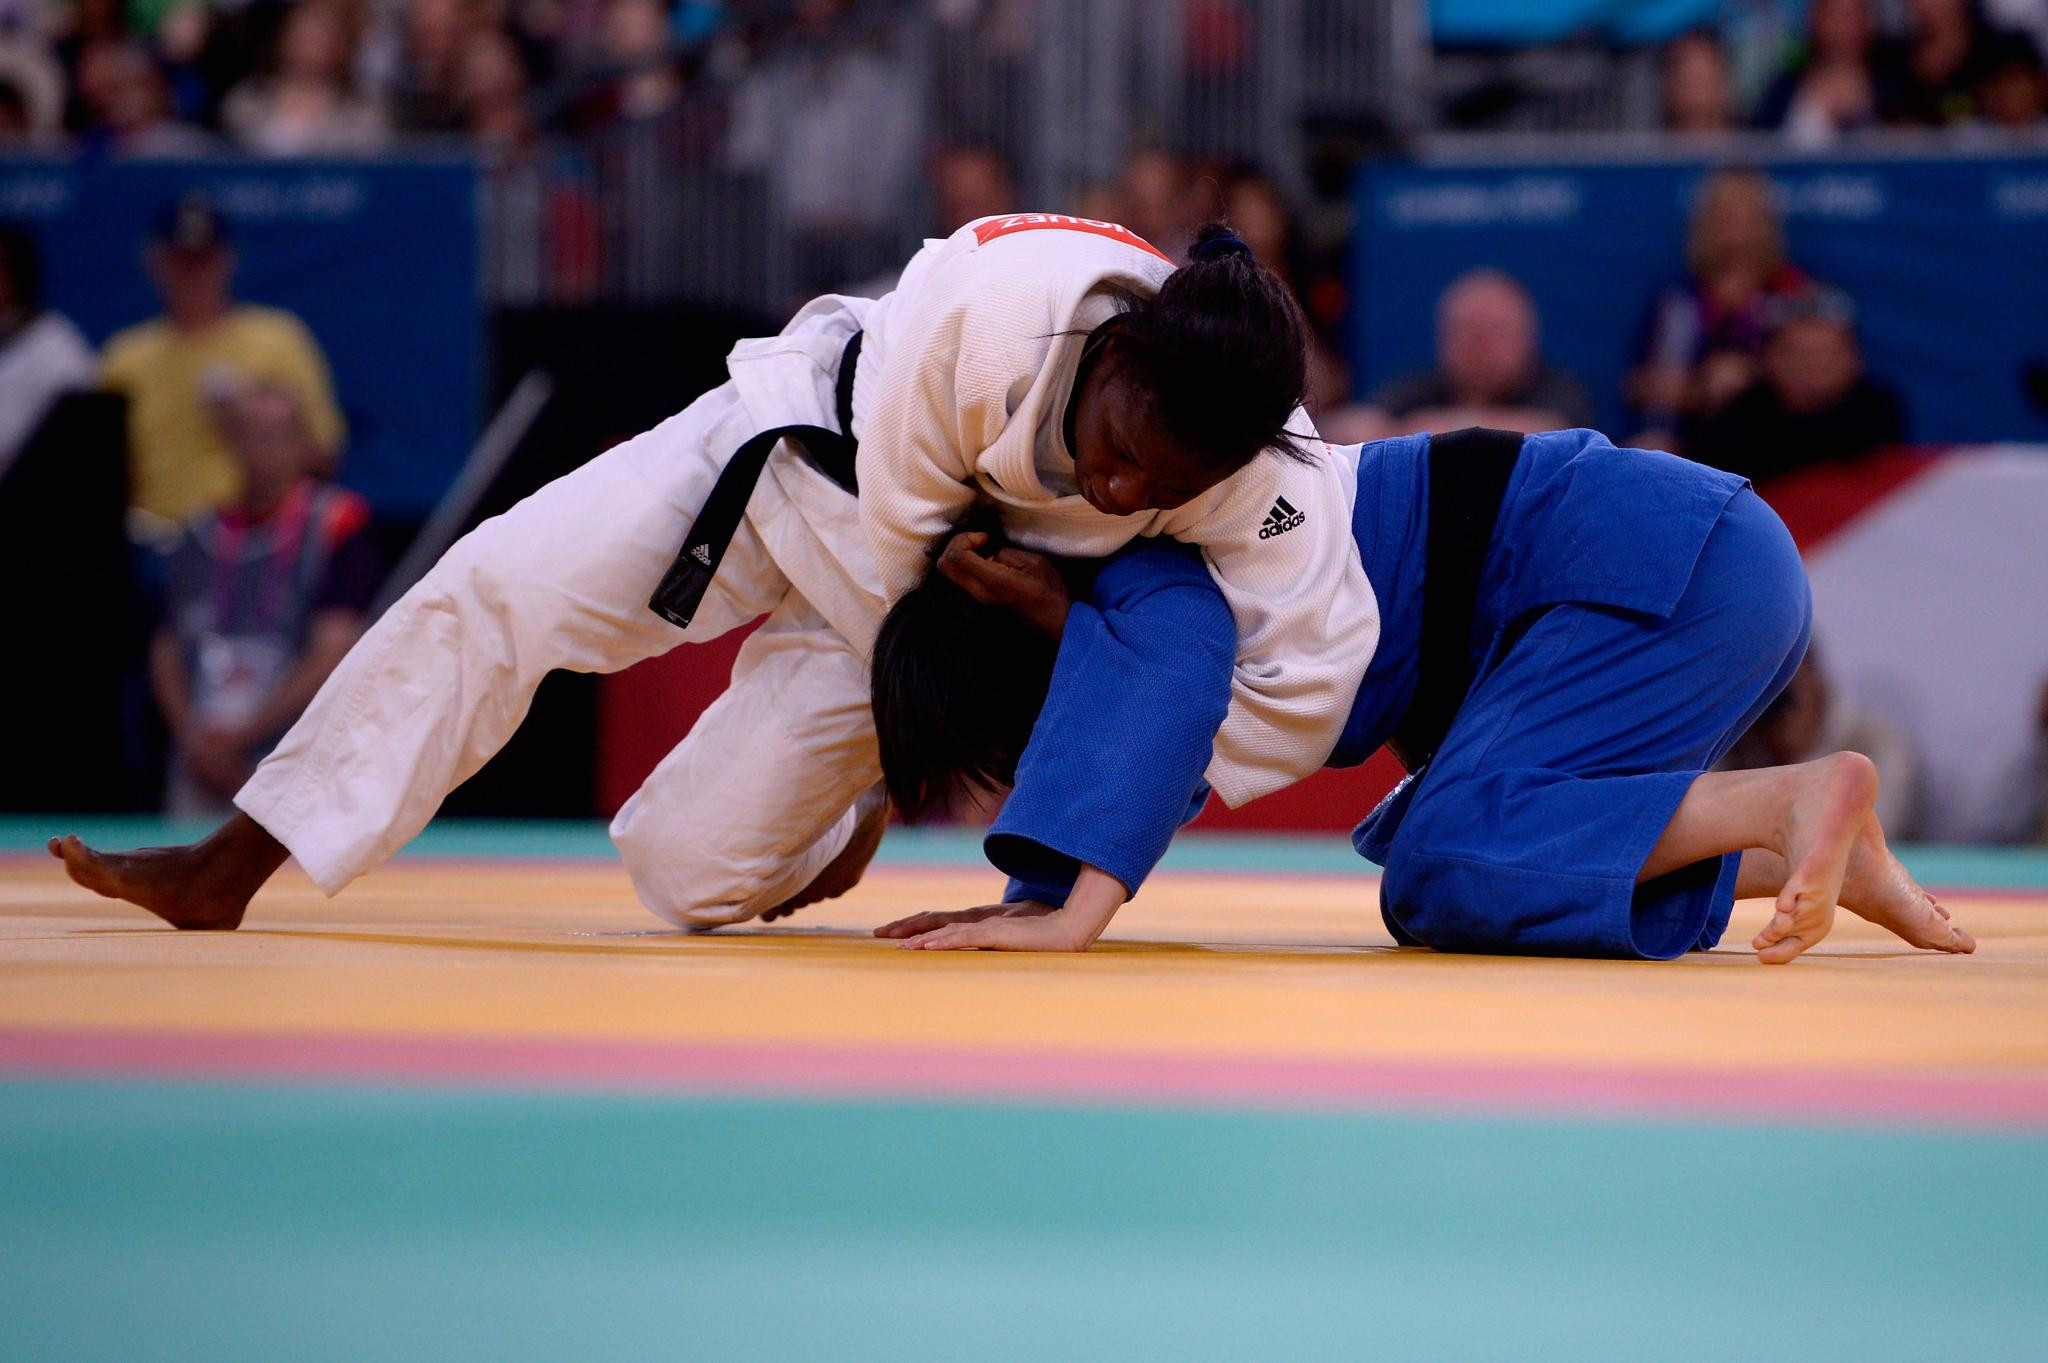 Judokas preparing for Tokyo 2020 are set to speak about what is needed to be a top athlete in one of the panel discussions ©Getty Images